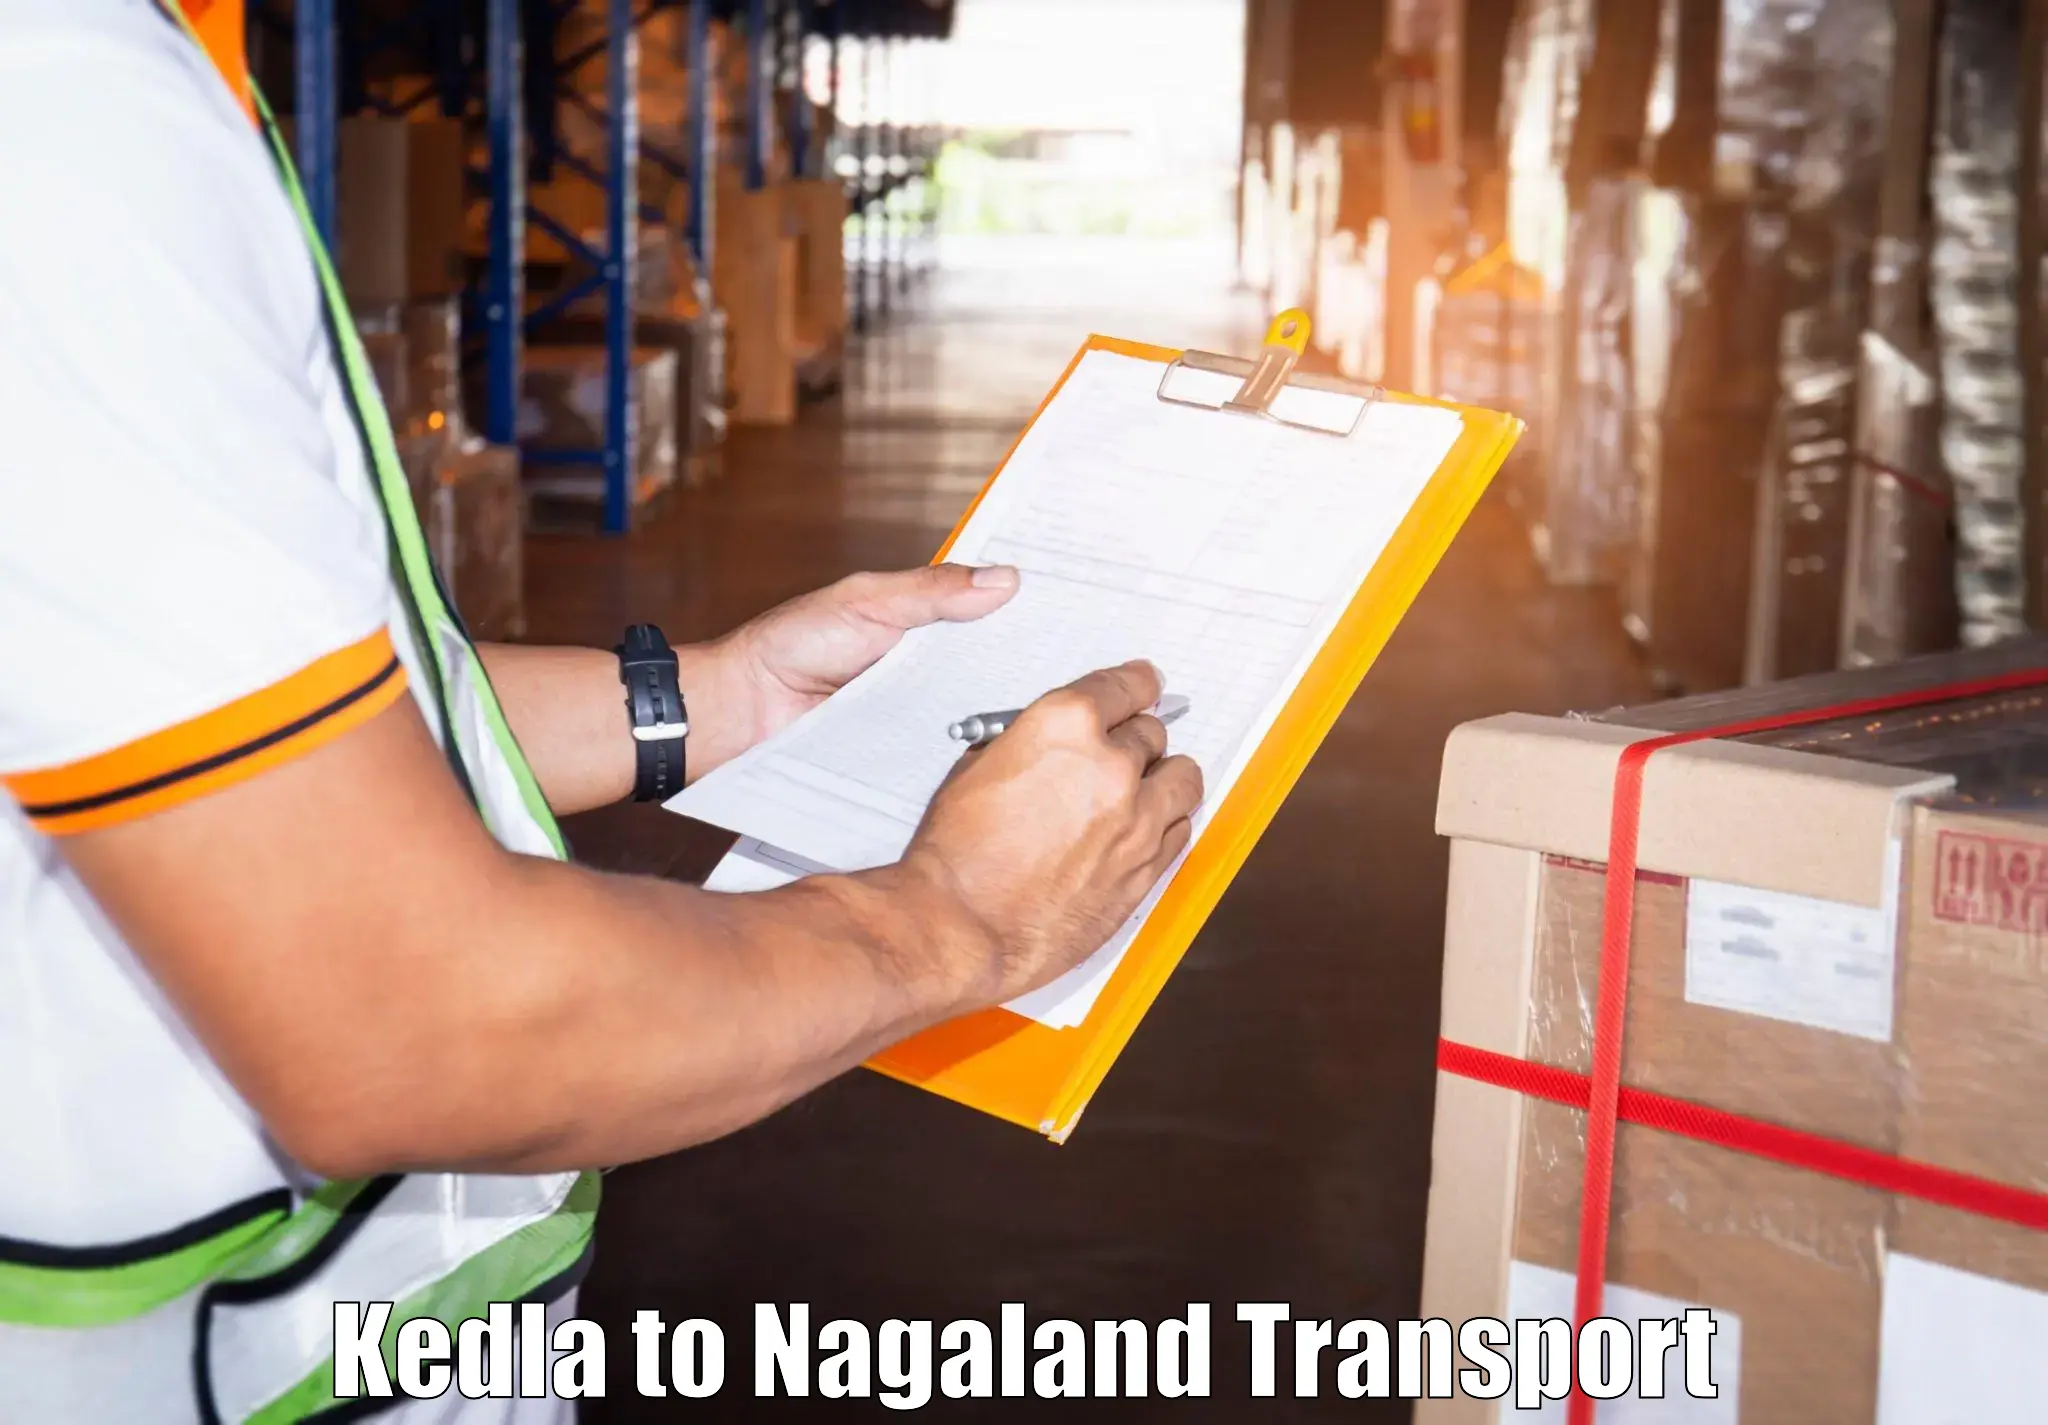 Container transport service Kedla to Dimapur